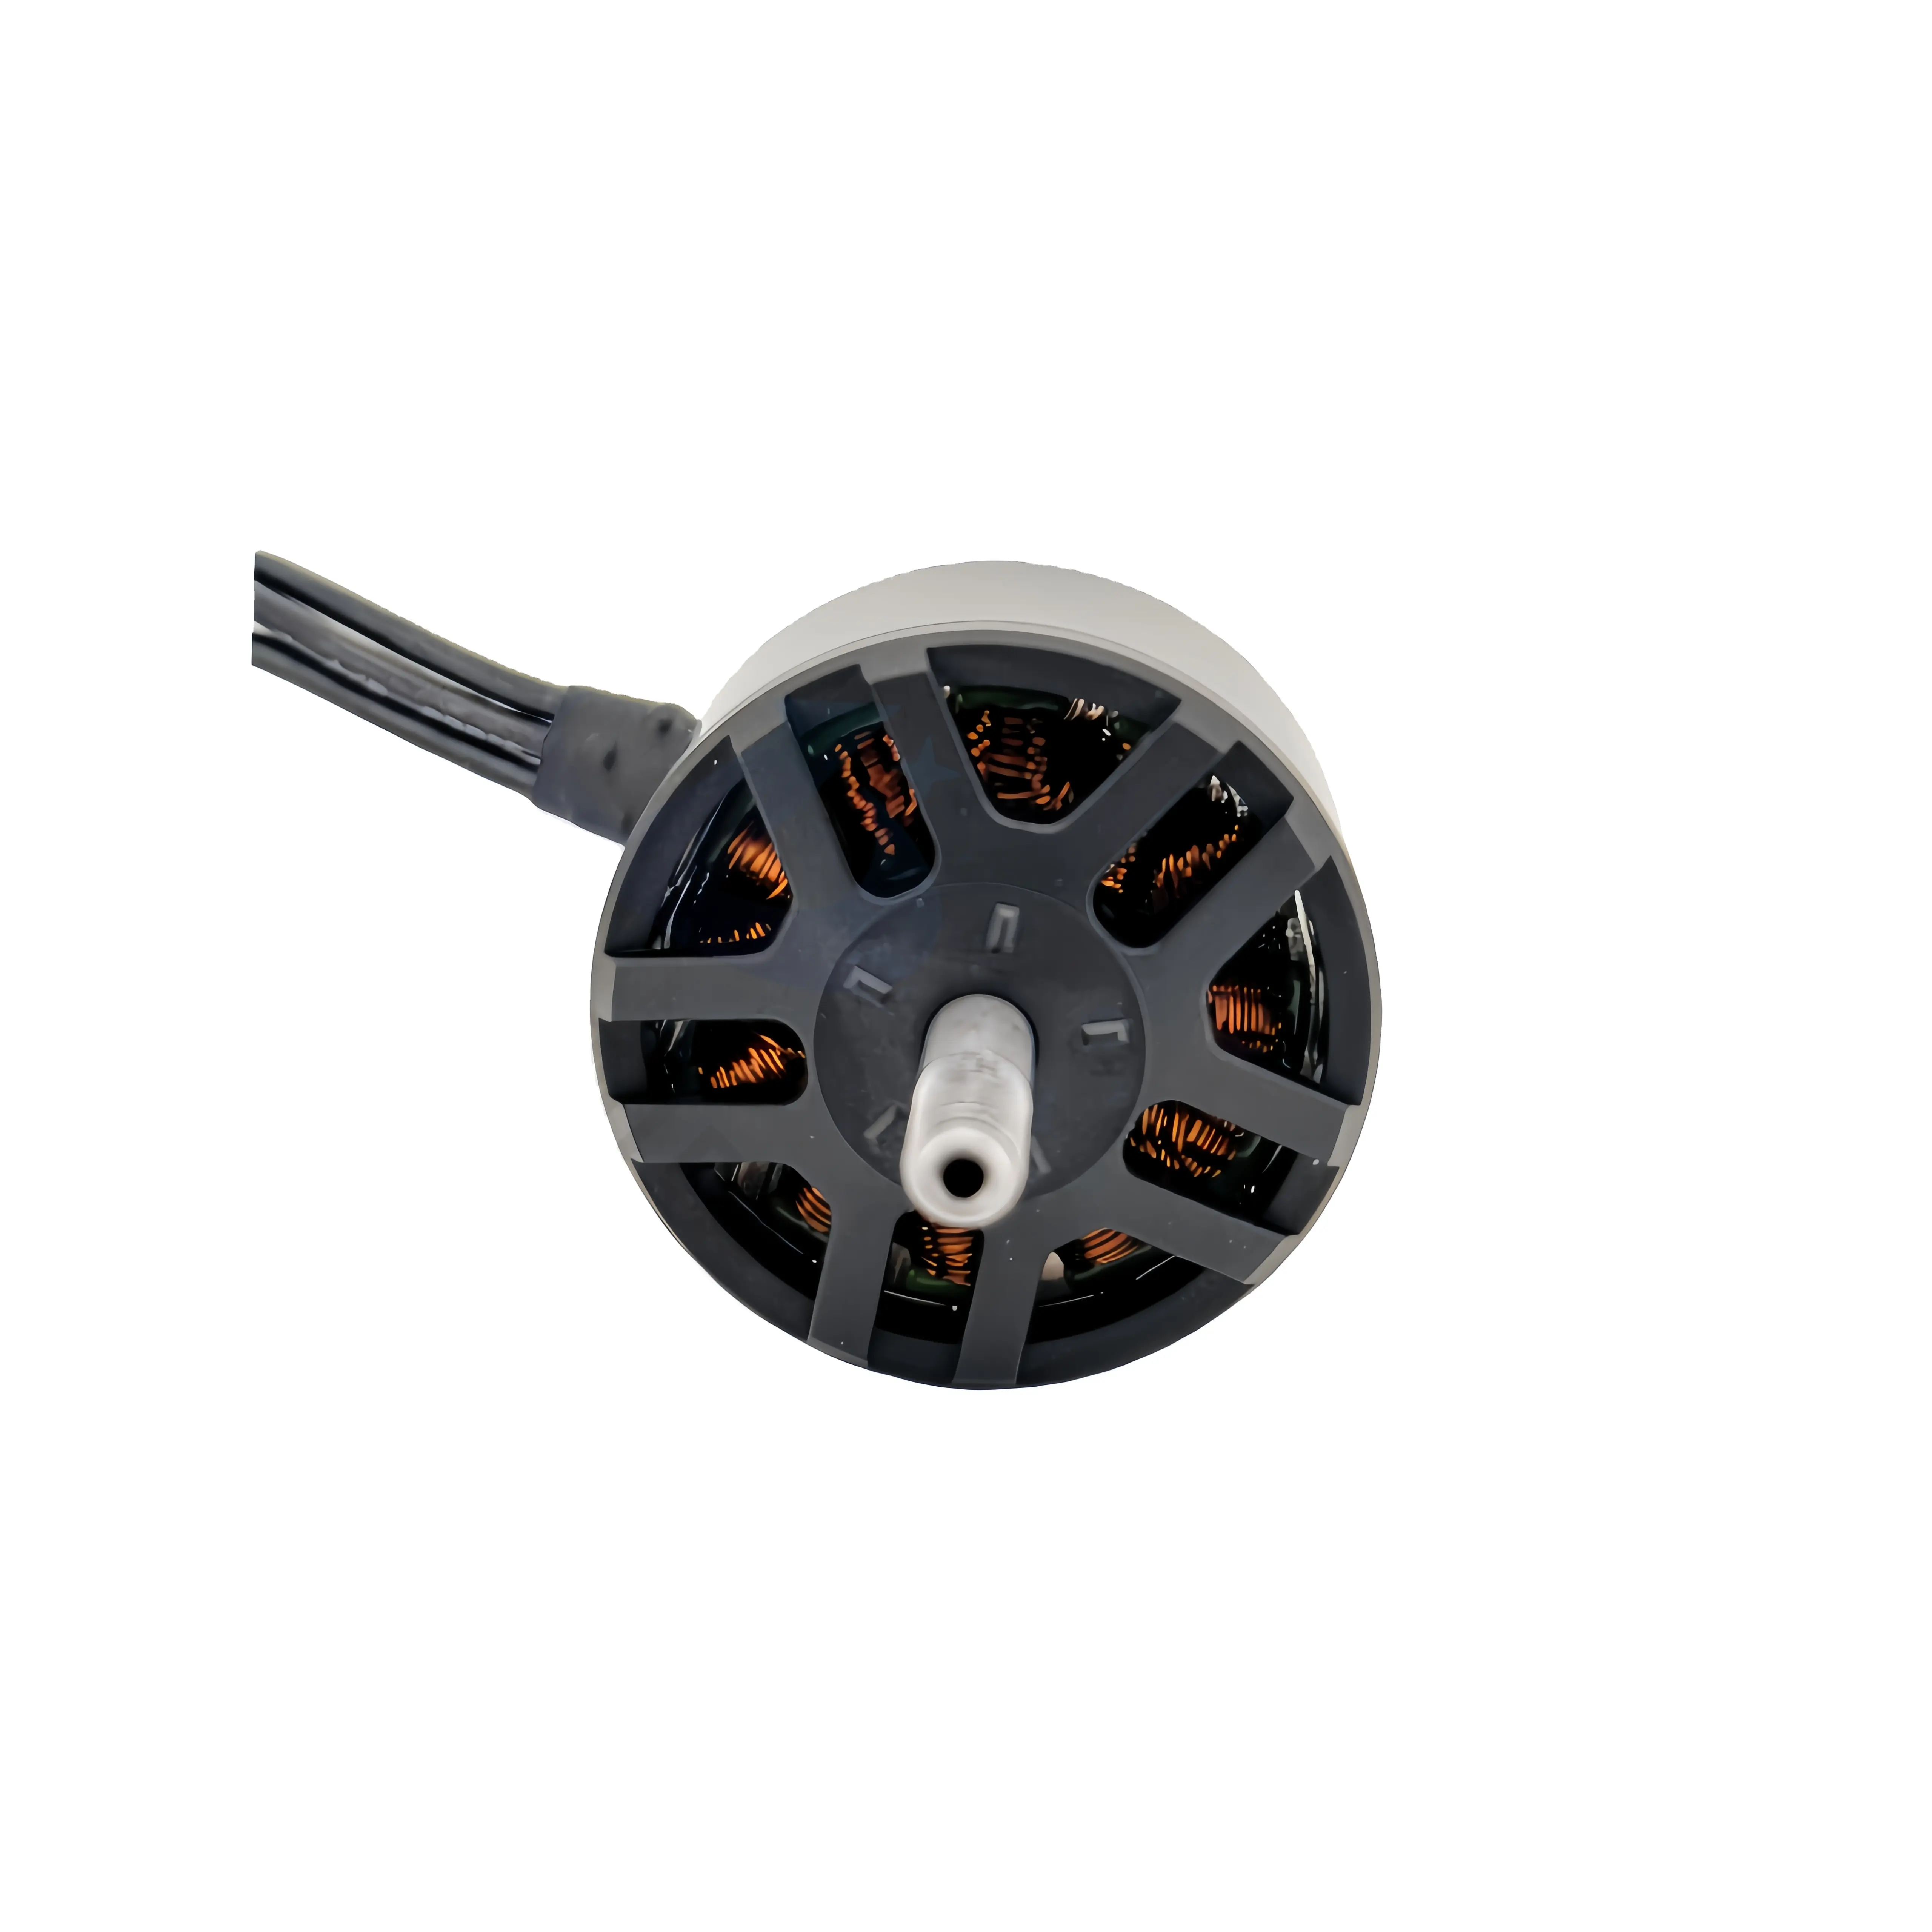 2.BLDC China-Made Brushless Motor Customizable for Drone 6.5V 1.5A 700KV High Power 960W Professional Motor Manufacturer price